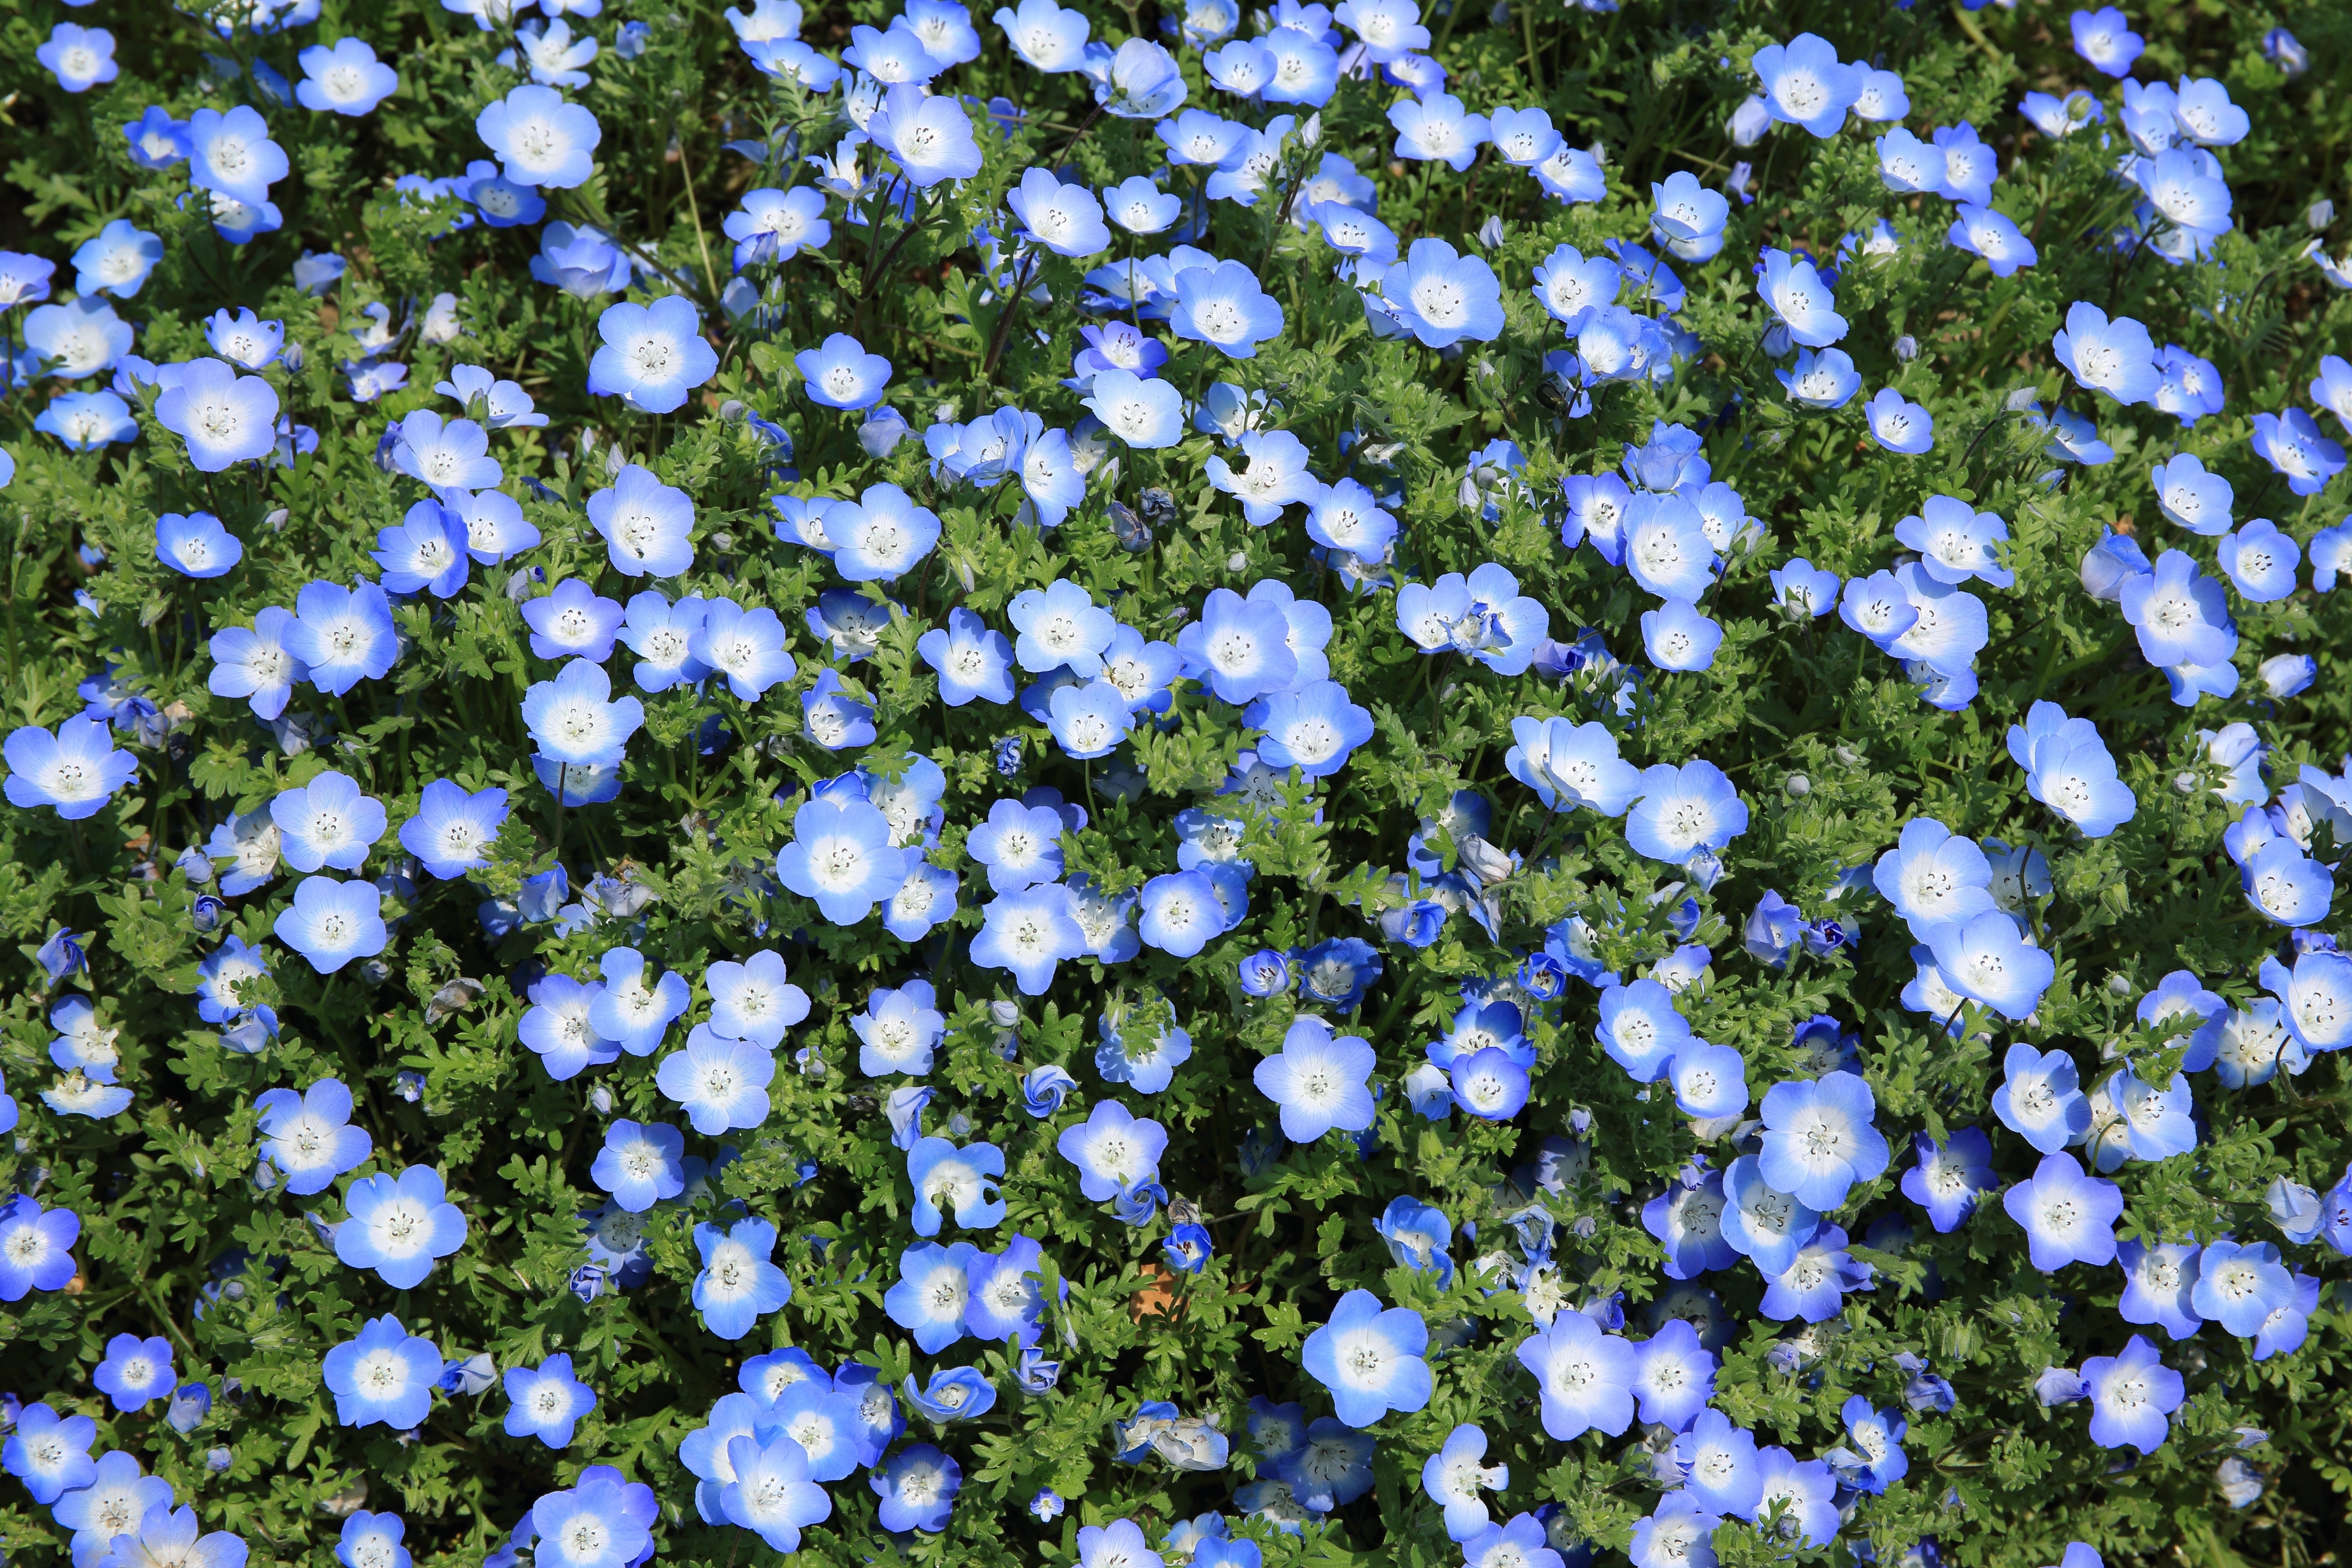 blue and white 5 petaled flowers